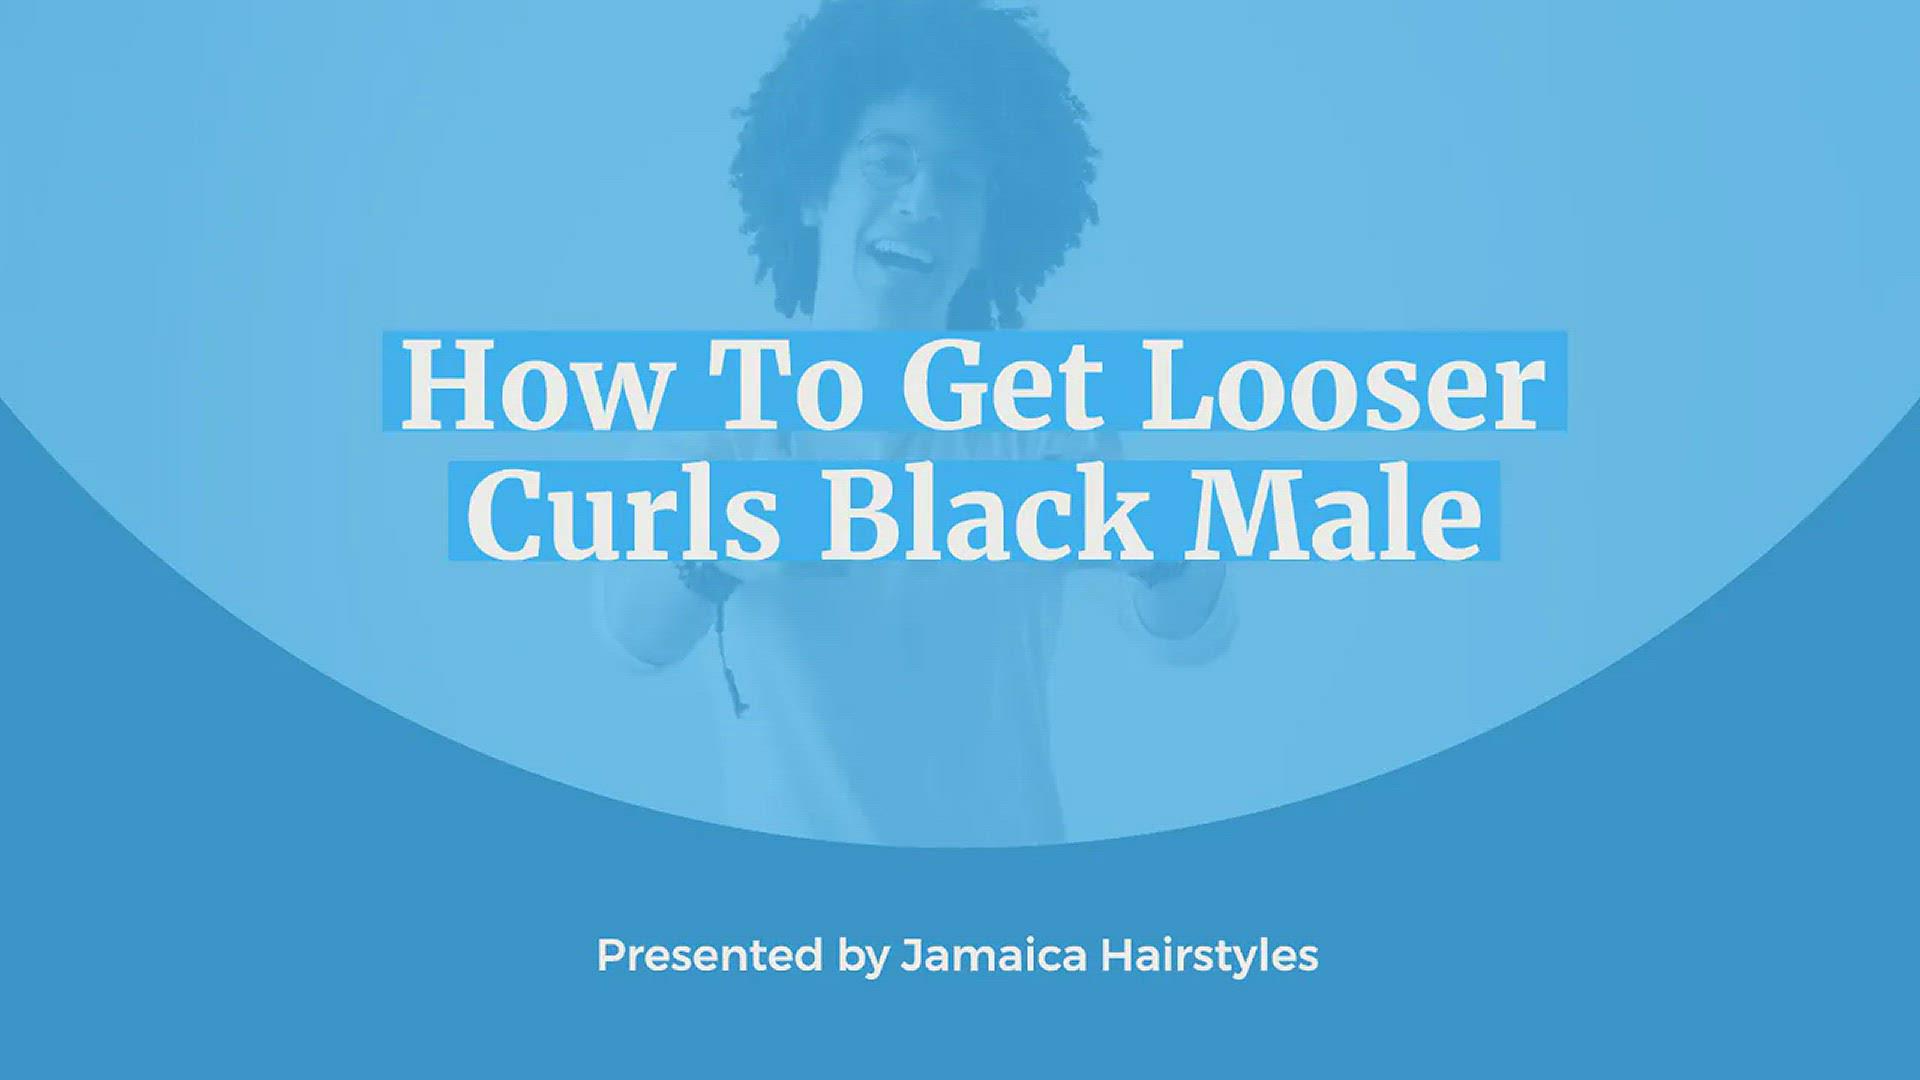 'Video thumbnail for How To Get Looser Curls Black Male'